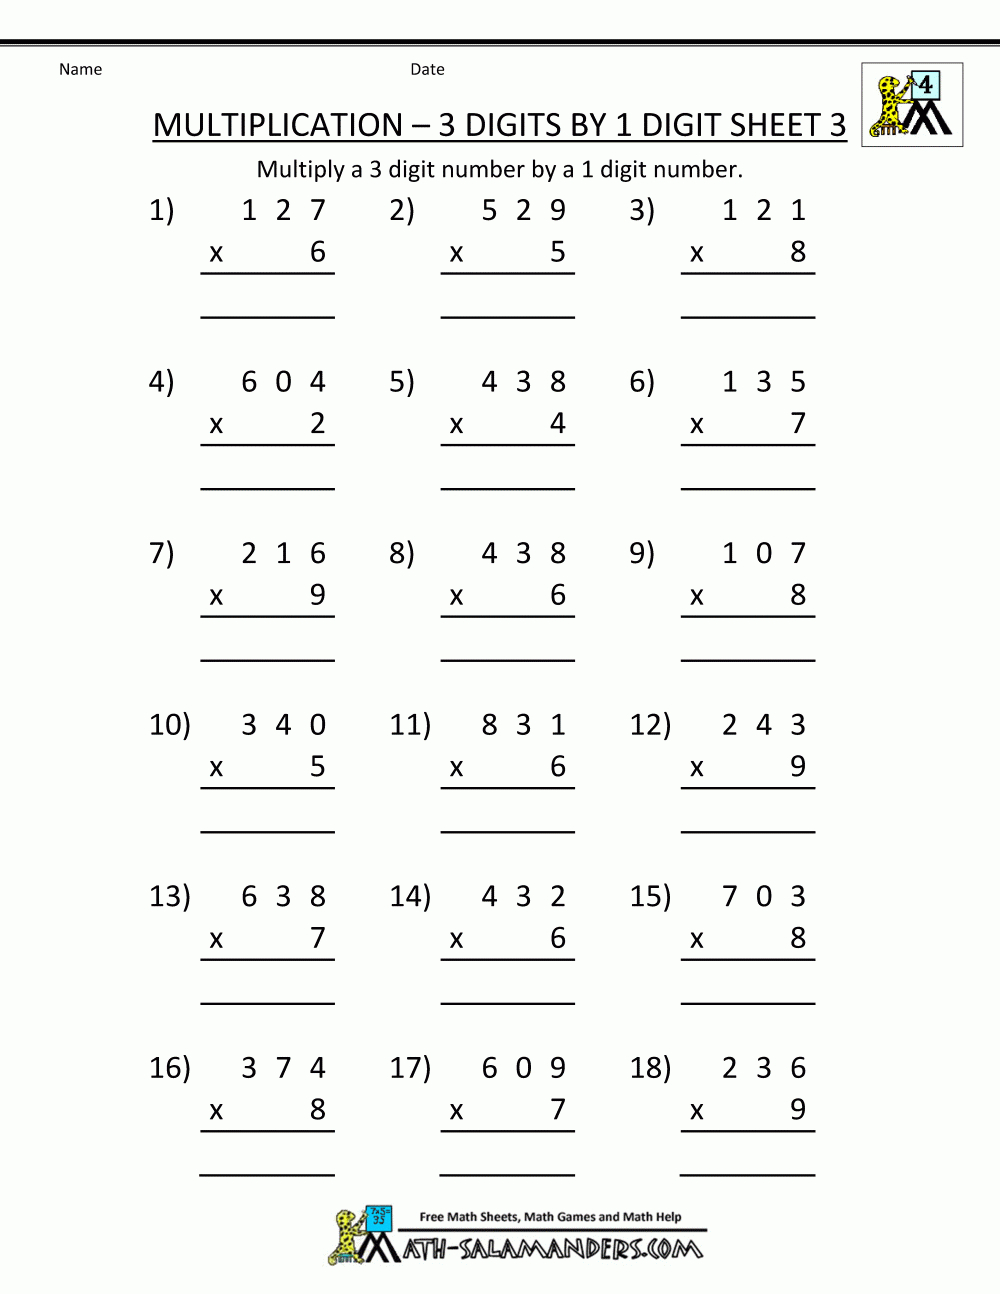 Free Math Sheets Multiplication 3 Digits1 Digit 3 | Math intended for Grade 3 Multiplication Printable